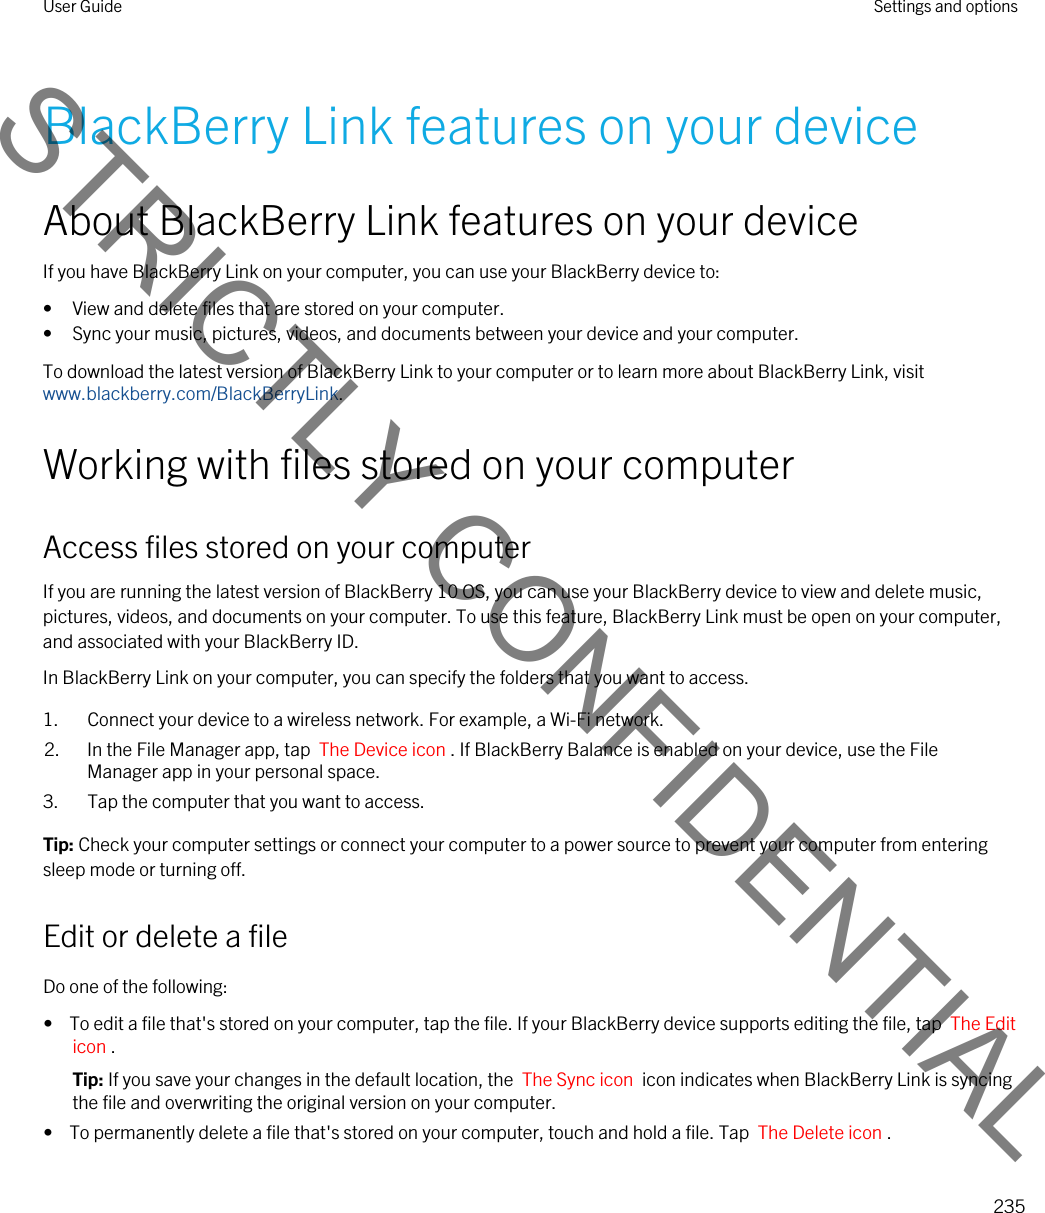 BlackBerry Link features on your deviceAbout BlackBerry Link features on your deviceIf you have BlackBerry Link on your computer, you can use your BlackBerry device to:• View and delete files that are stored on your computer.• Sync your music, pictures, videos, and documents between your device and your computer.To download the latest version of BlackBerry Link to your computer or to learn more about BlackBerry Link, visit www.blackberry.com/BlackBerryLink.Working with files stored on your computerAccess files stored on your computerIf you are running the latest version of BlackBerry 10 OS, you can use your BlackBerry device to view and delete music, pictures, videos, and documents on your computer. To use this feature, BlackBerry Link must be open on your computer, and associated with your BlackBerry ID.In BlackBerry Link on your computer, you can specify the folders that you want to access.1. Connect your device to a wireless network. For example, a Wi-Fi network.2. In the File Manager app, tap  The Device icon . If BlackBerry Balance is enabled on your device, use the File Manager app in your personal space.3. Tap the computer that you want to access.Tip: Check your computer settings or connect your computer to a power source to prevent your computer from entering sleep mode or turning off.Edit or delete a fileDo one of the following:•  To edit a file that&apos;s stored on your computer, tap the file. If your BlackBerry device supports editing the file, tap  The Edit icon .Tip: If you save your changes in the default location, the  The Sync icon  icon indicates when BlackBerry Link is syncing the file and overwriting the original version on your computer.•  To permanently delete a file that&apos;s stored on your computer, touch and hold a file. Tap  The Delete icon .User Guide Settings and options235STRICTLY CONFIDENTIAL